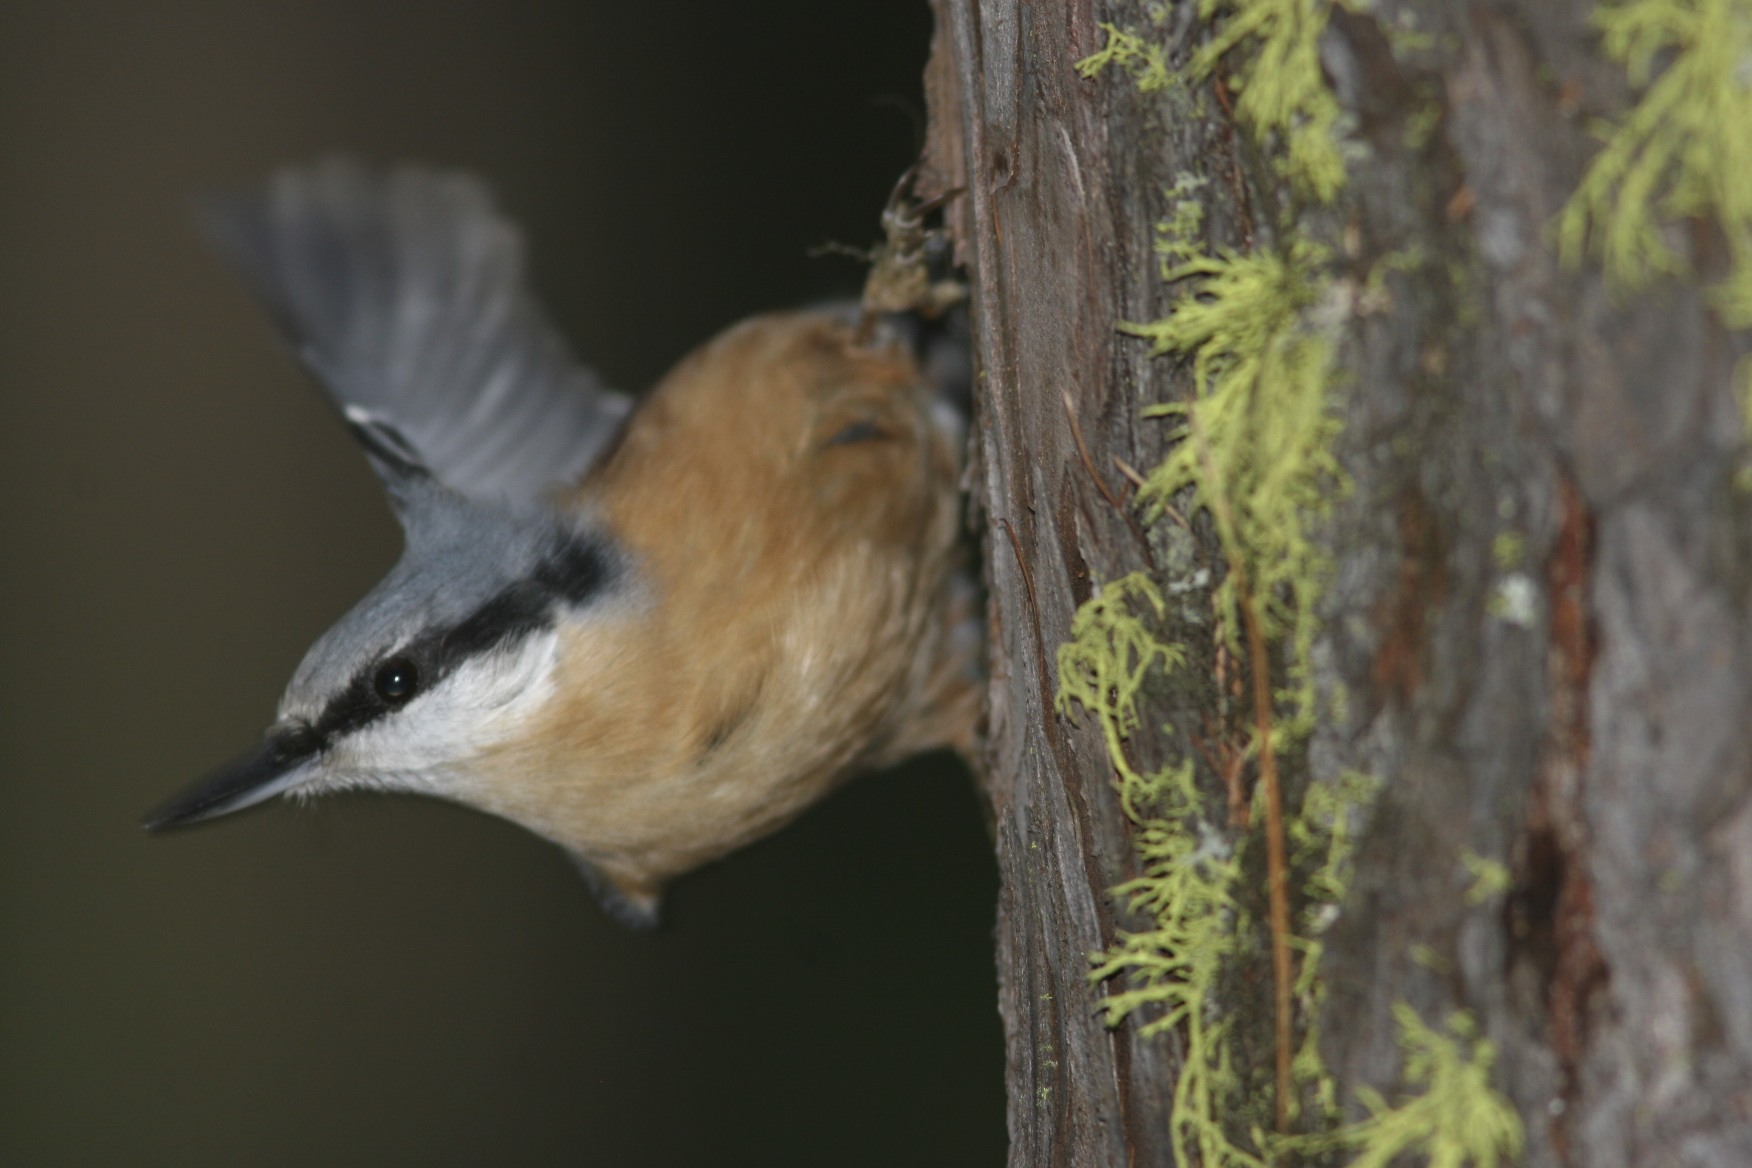 nuthatch canon 20d f 5.6 1/250 300 f 4 + 1.4...